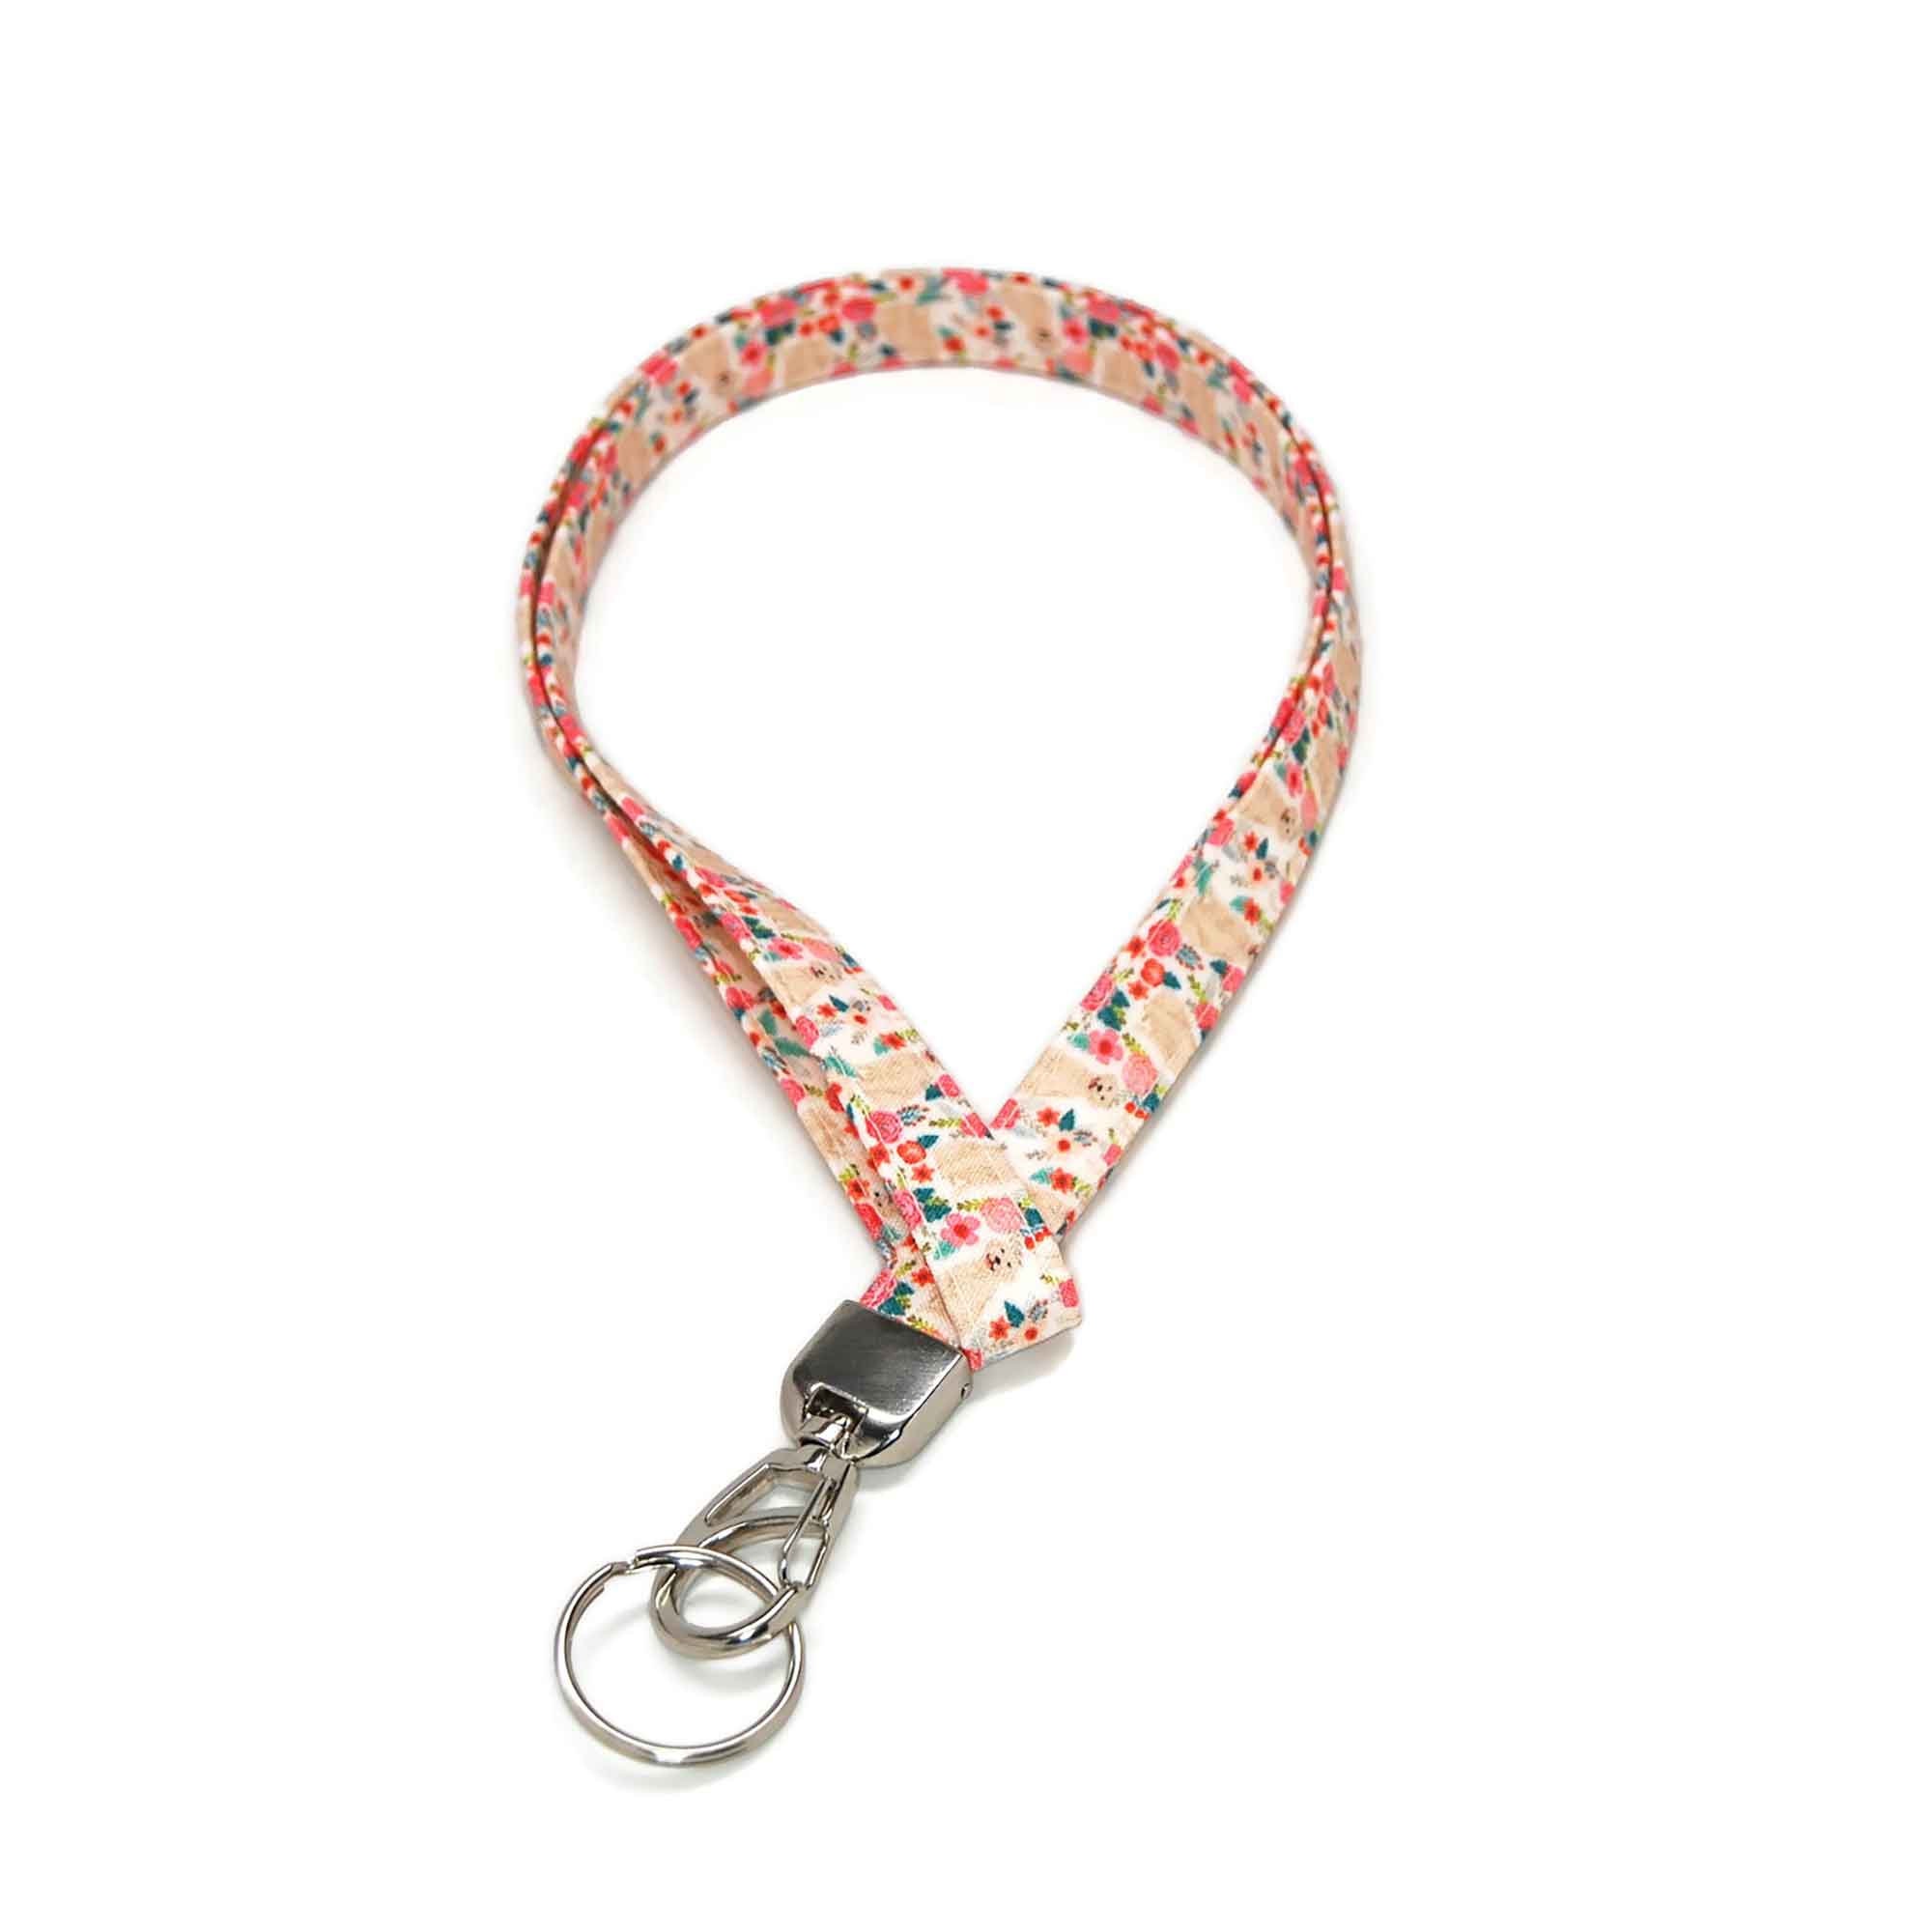 Ever Spring Lanyard with Cute ID Card Holder Case ID Badge Display Window Detachable Silky Neck Lanyard Strap with Clip Clasp and Keyring, Keys